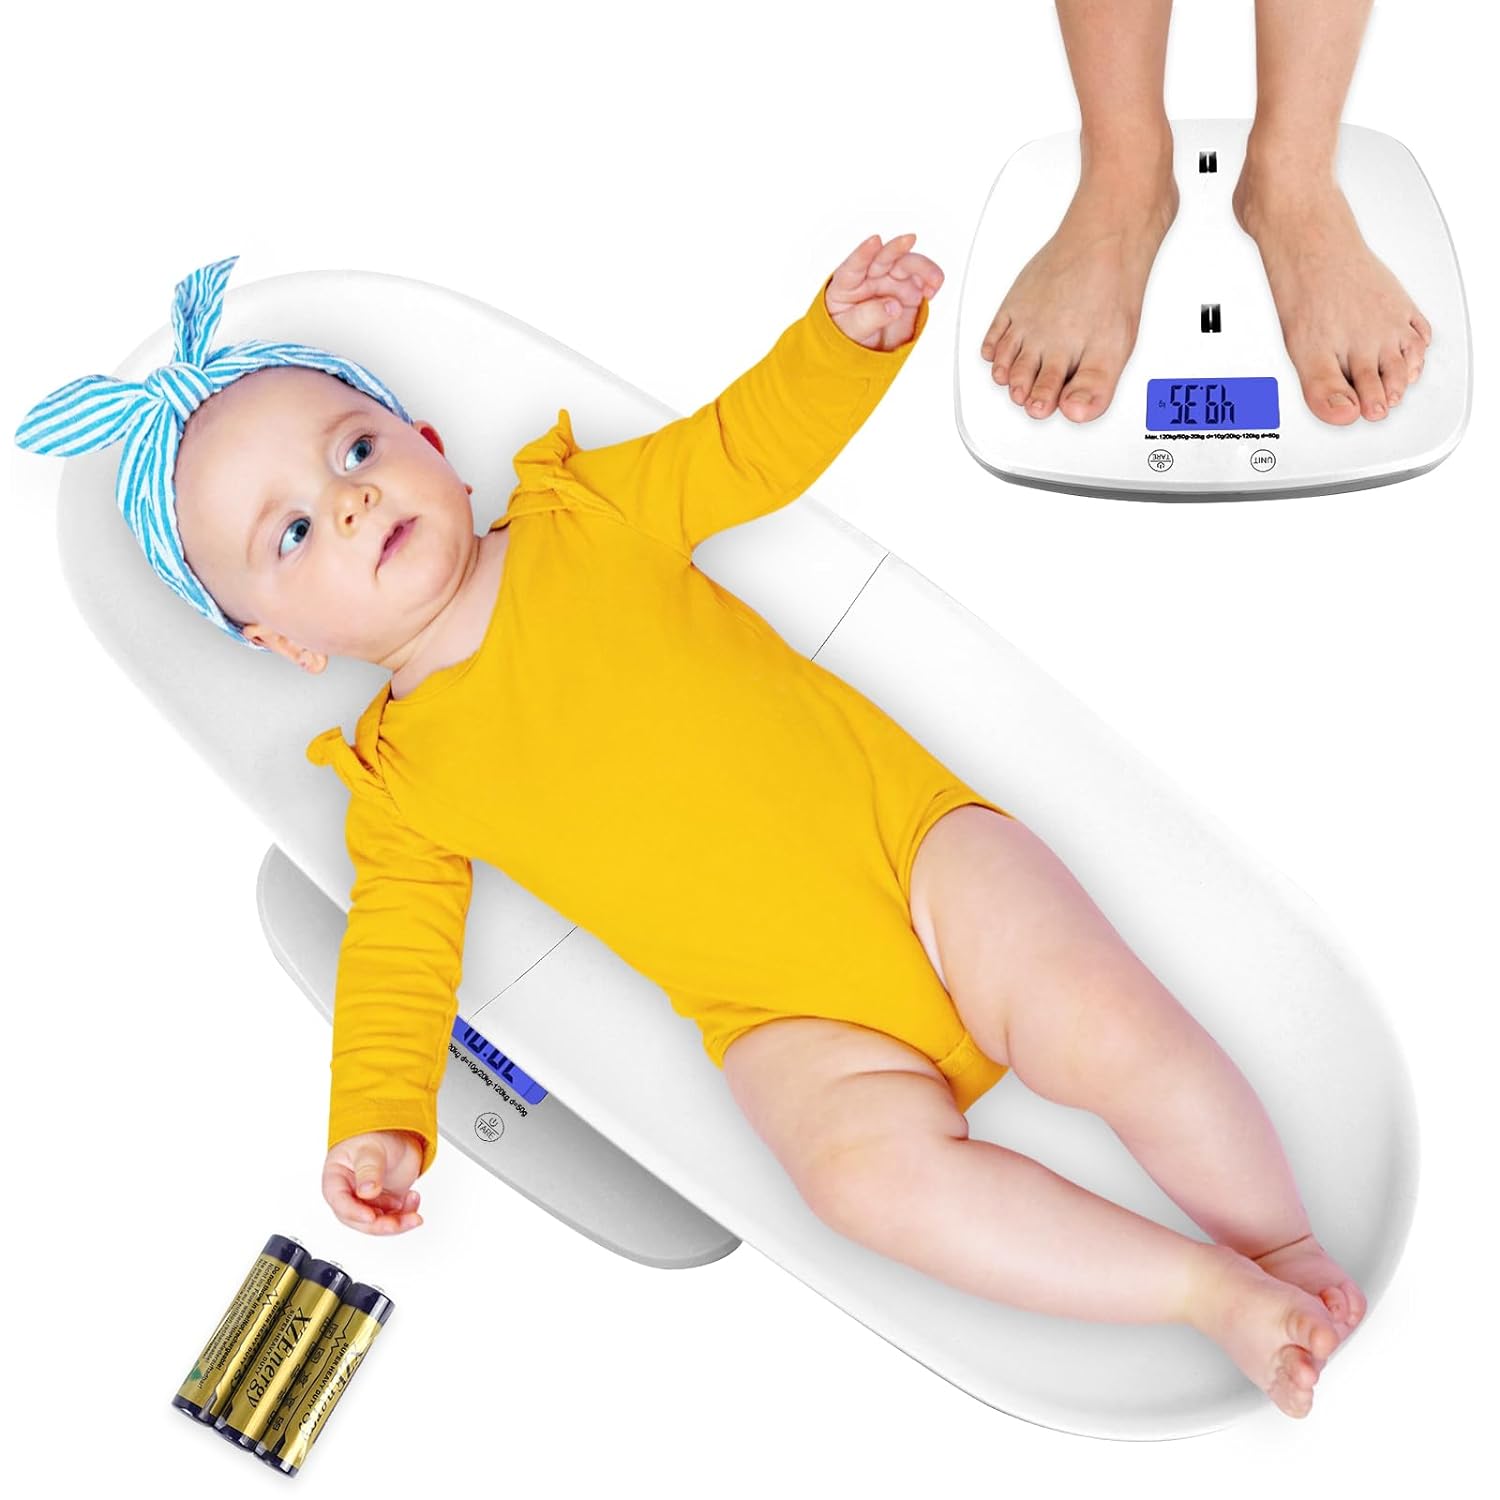 Baby Scale.Measure The Growth of Newborns.Infants.Kids.Adults.Cats and Dogs-Up to 265 lbs.Tracks Weight in Pounds.Ounces and Kilograms